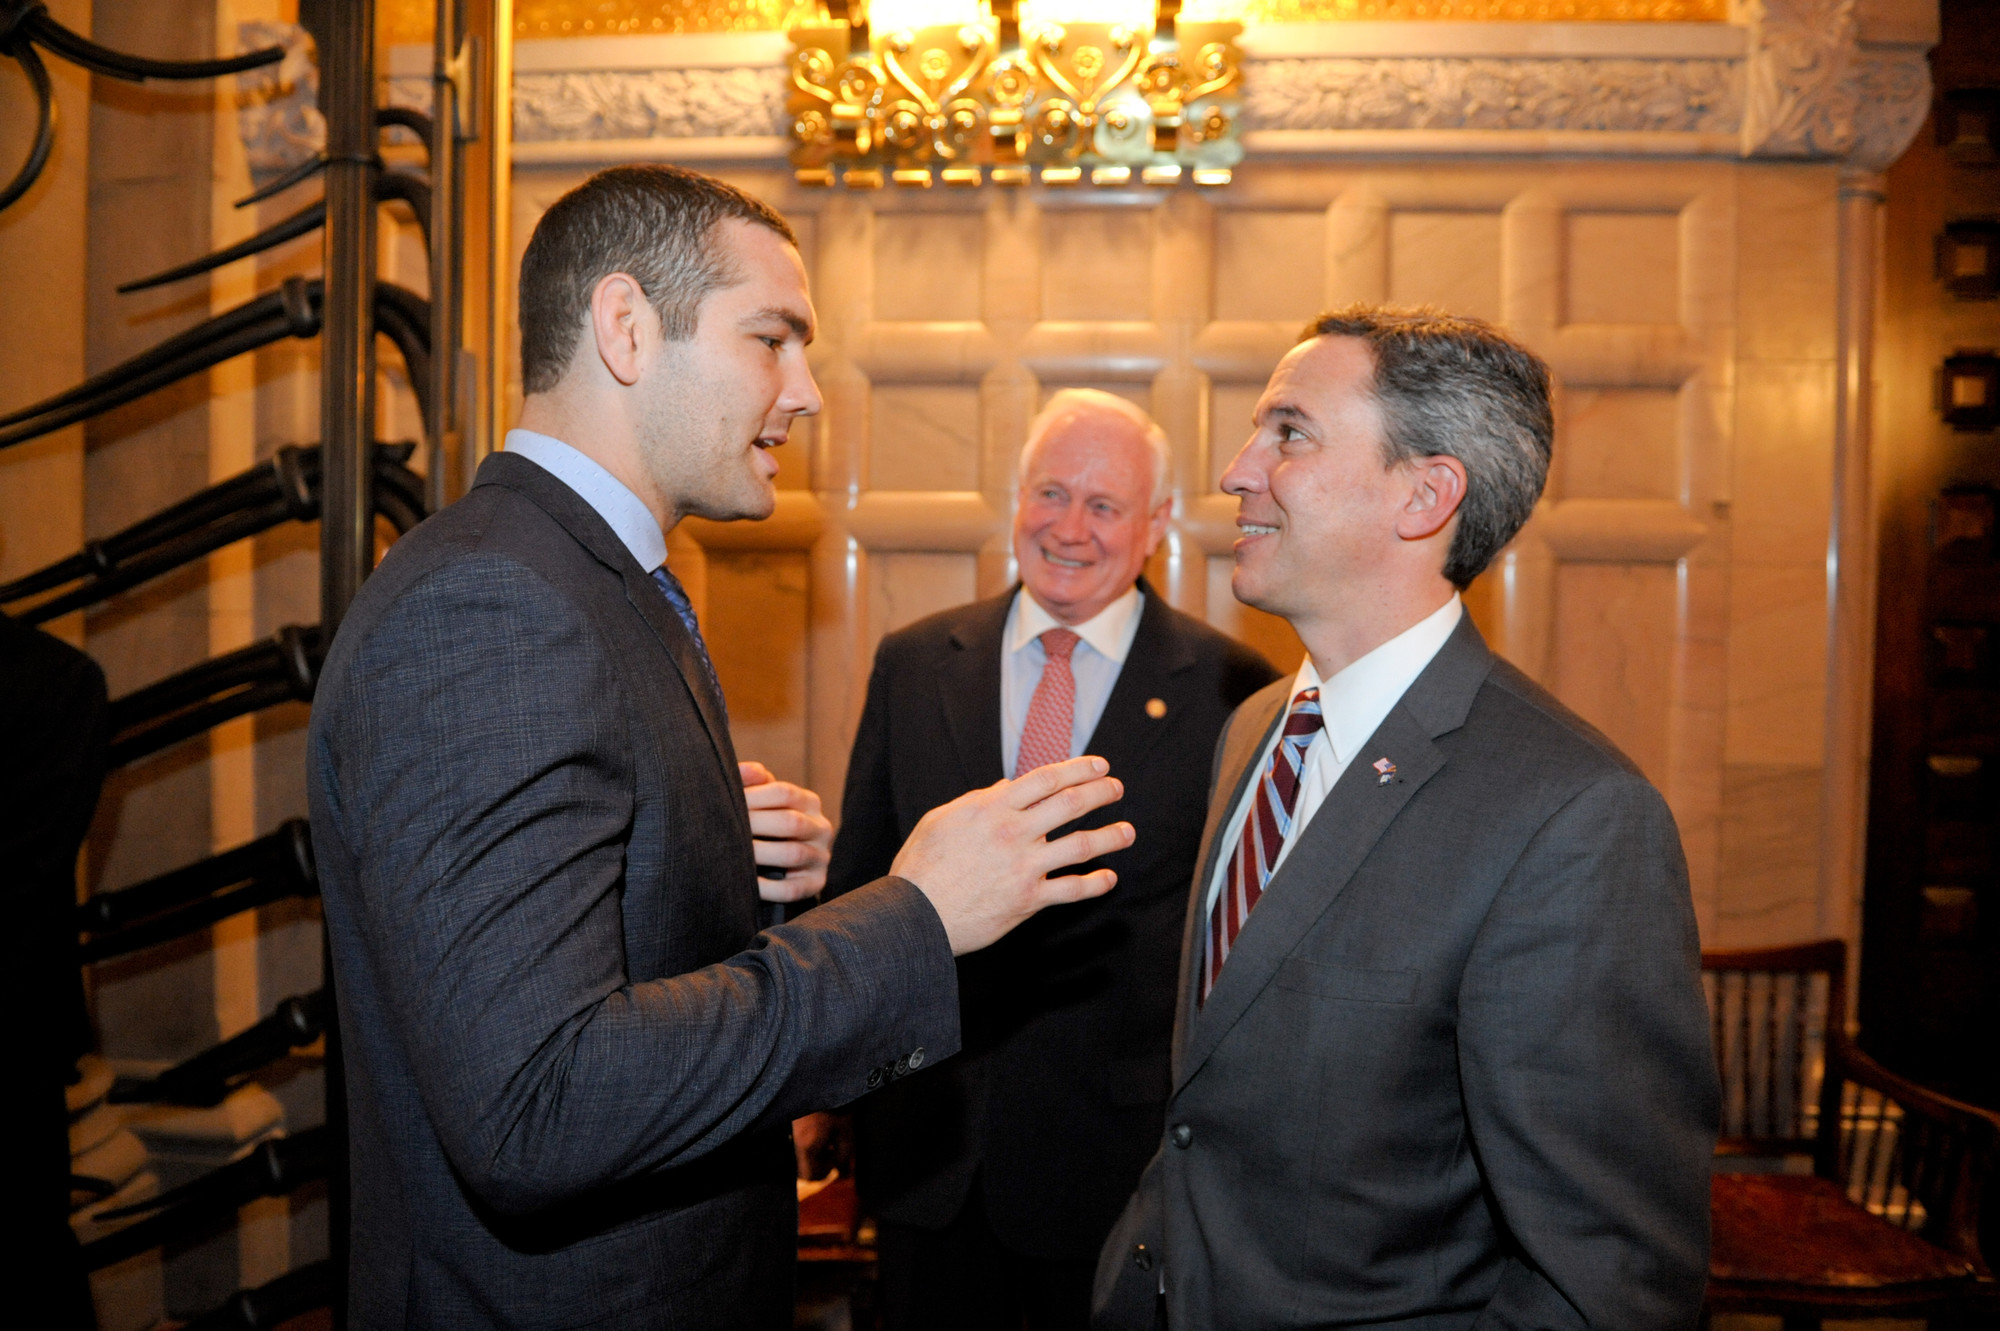 Chris Weidman consulted with Republican Sen. Jack Martins outside the Senate chamber during the last week of January.